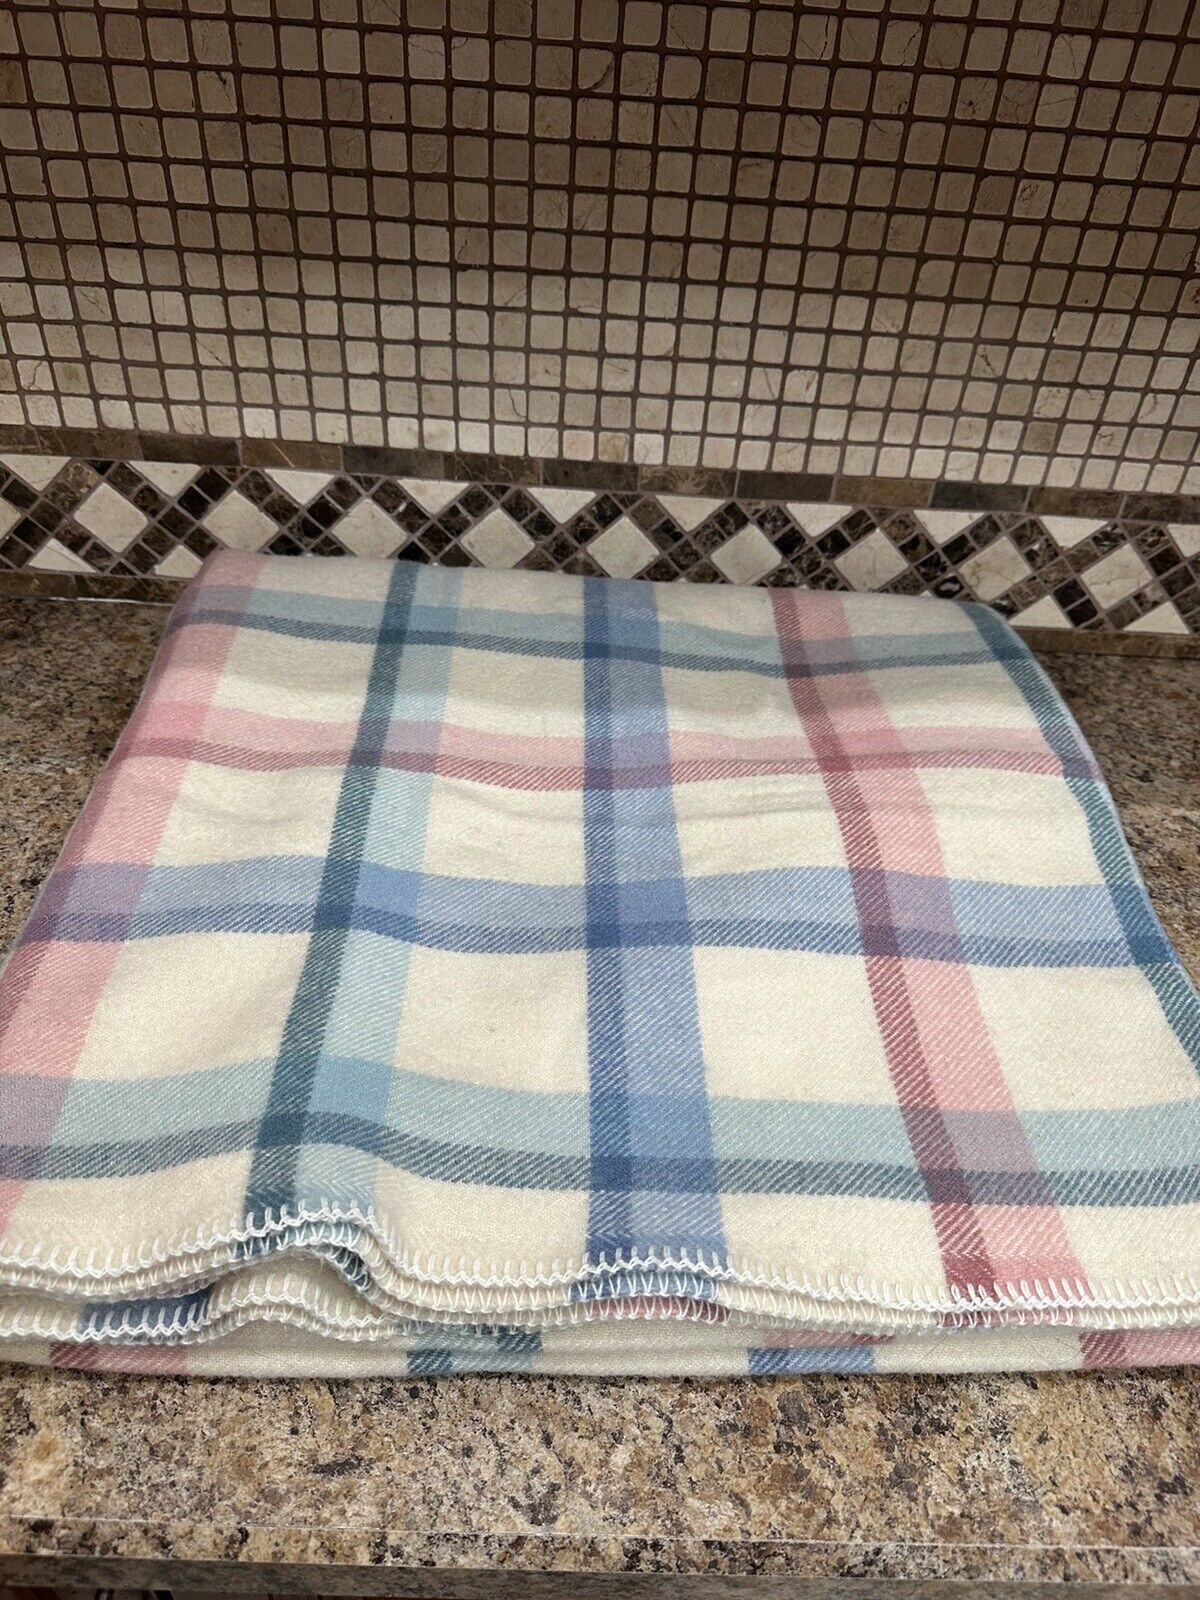 Faribo 100% Wool Blanket Double Beige Pink and Blue Made in the USA Vintage